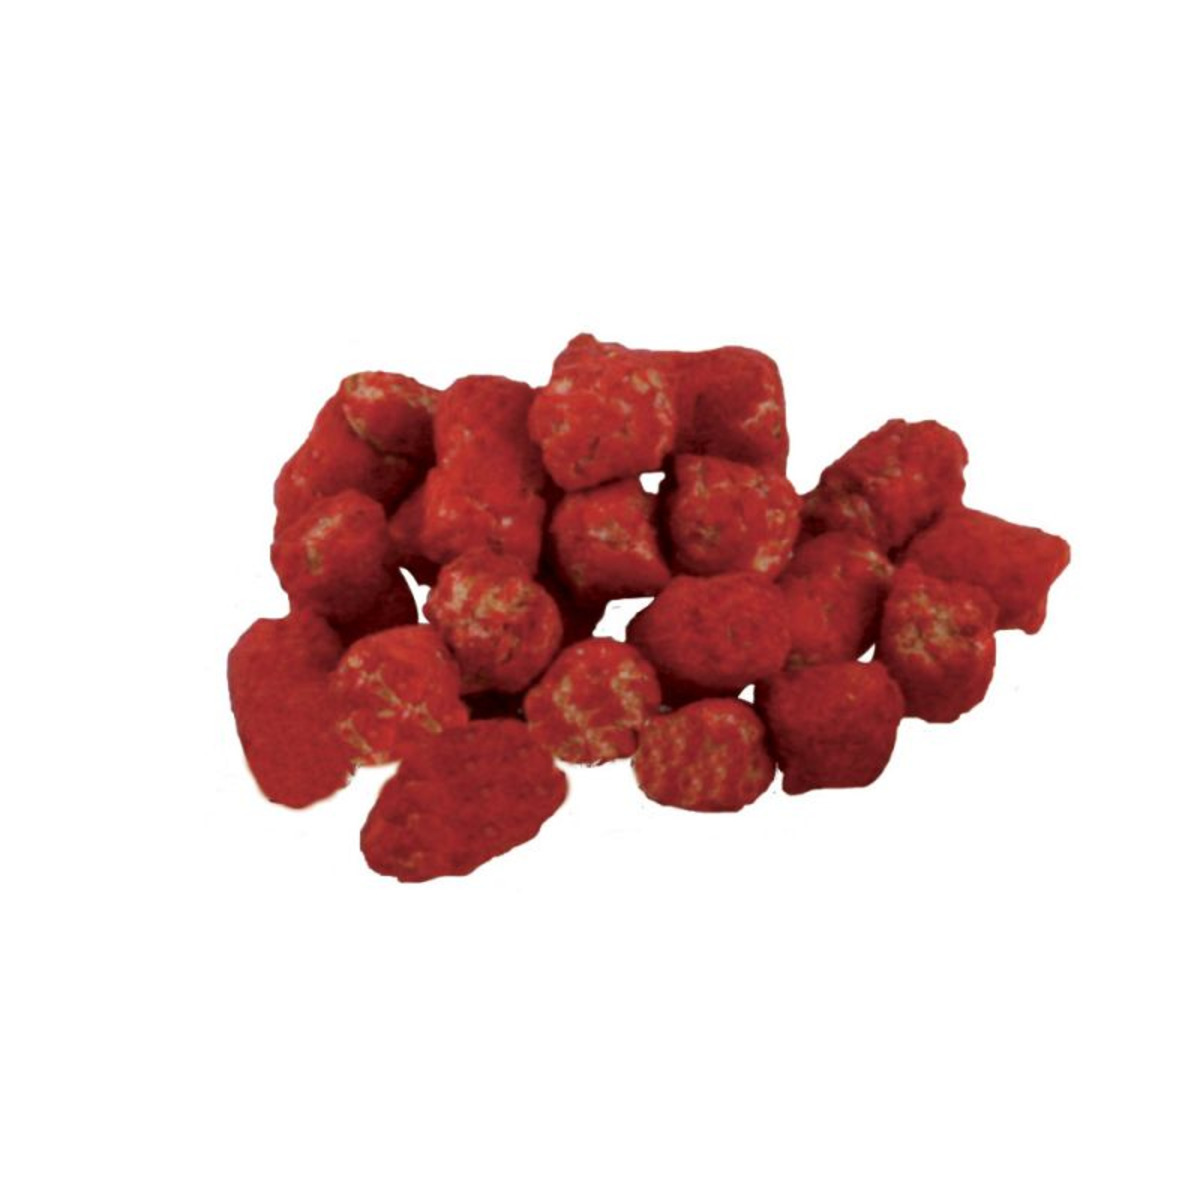 Reactor Baits Fastest Free Form Pellets - Strawberry